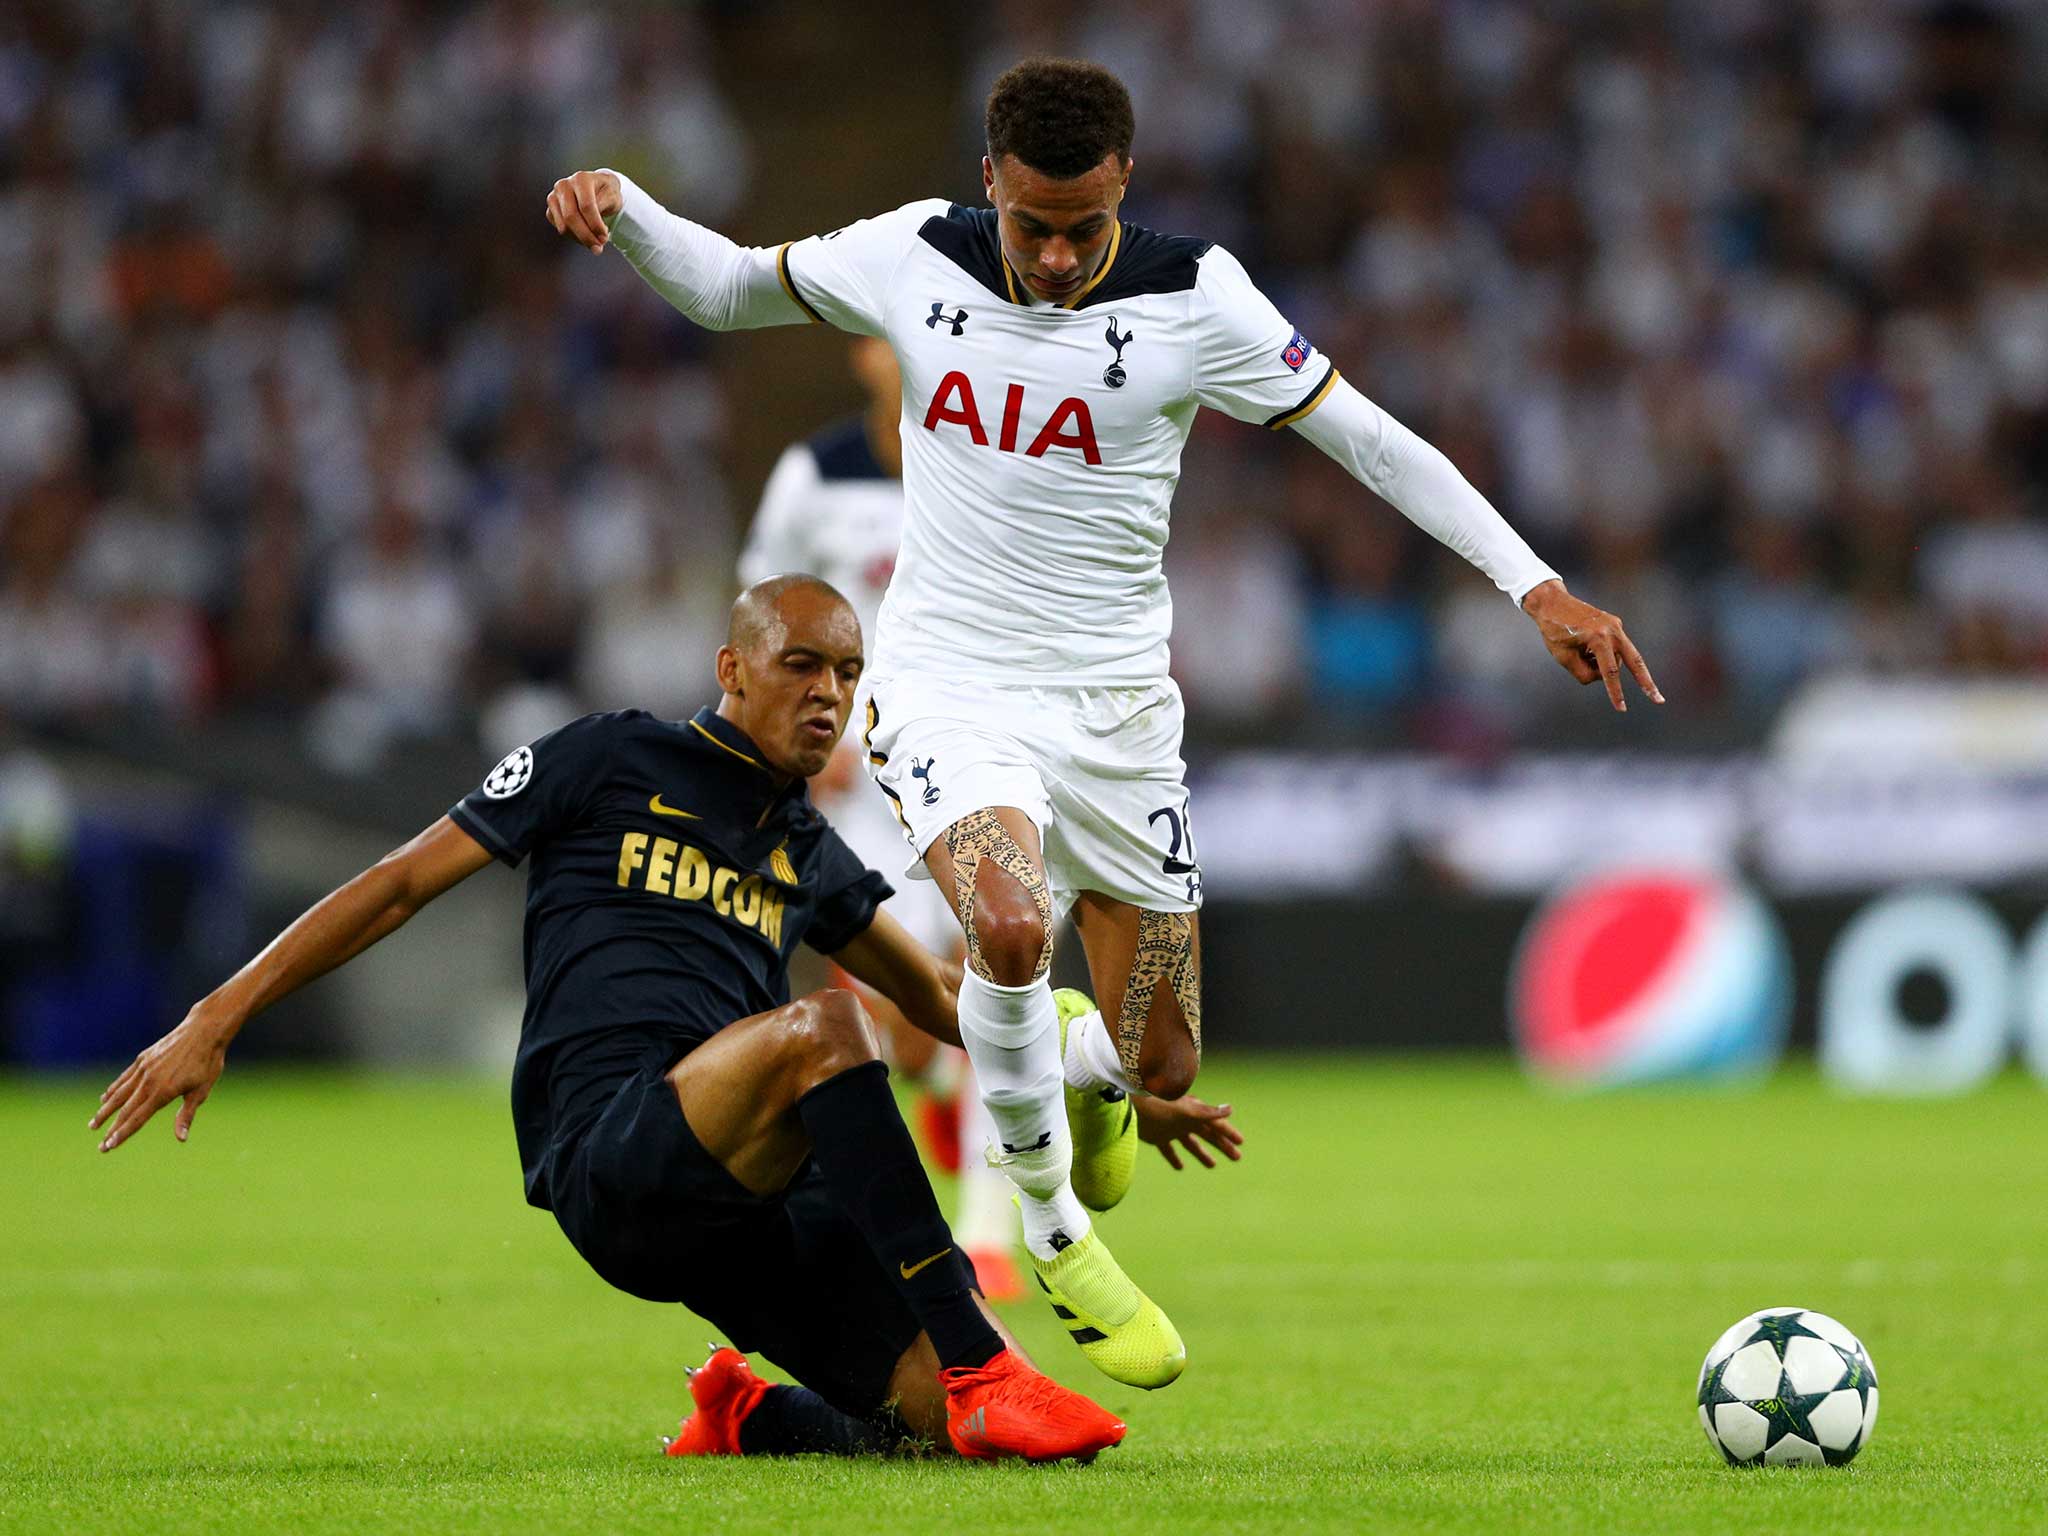 Dele Alli made his debut in the Champions League against Monaco this week